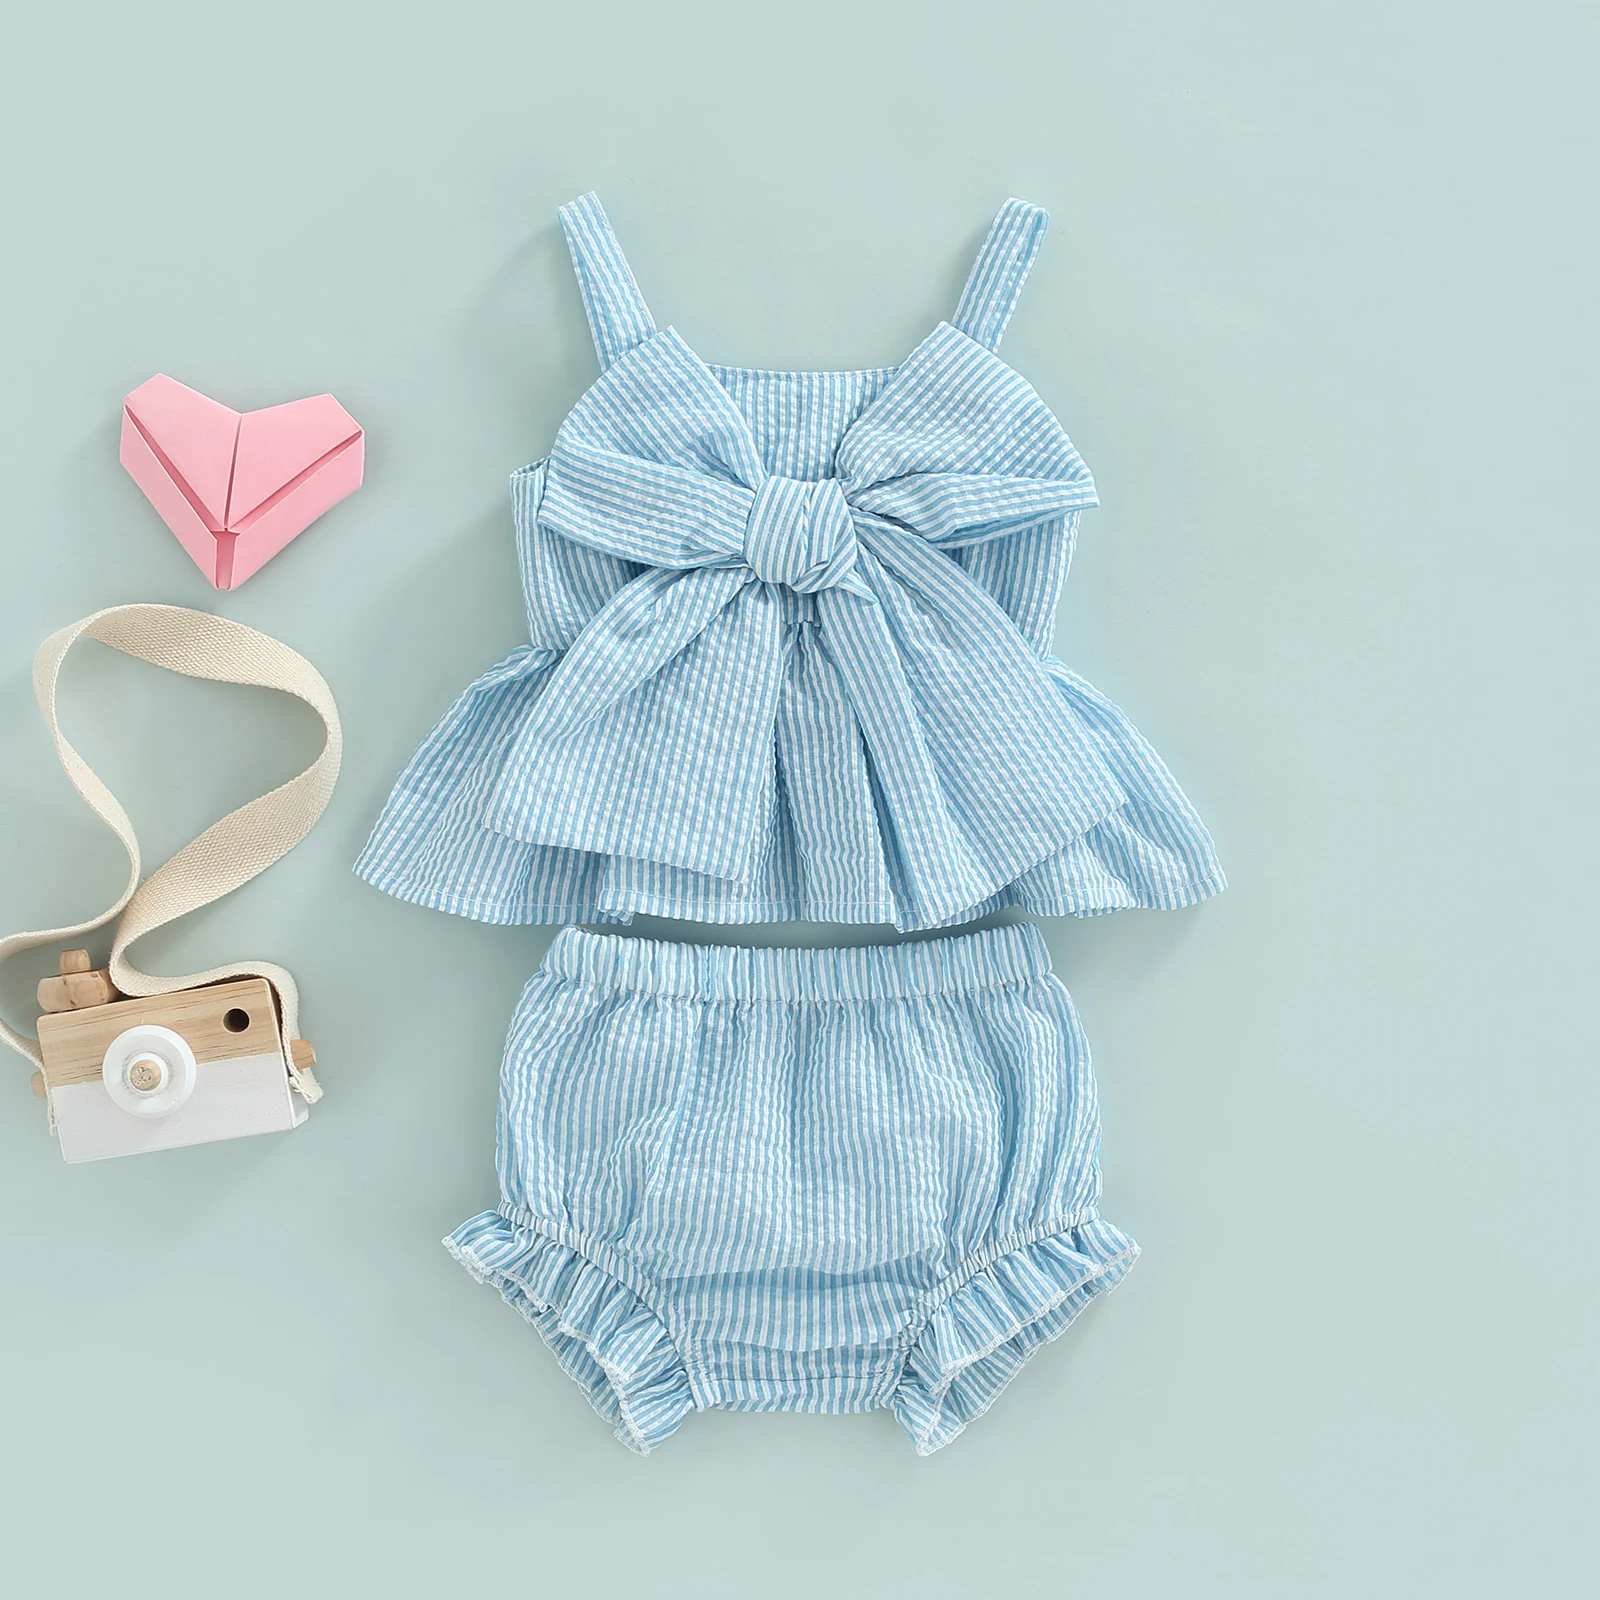 Ma&Baby 0-18M Newborn Infant Baby Girls Clothes Set Bow Sleeveless Tops Shorts Cute Girls Summer Outfits  D01 Baby Clothing Set for boy